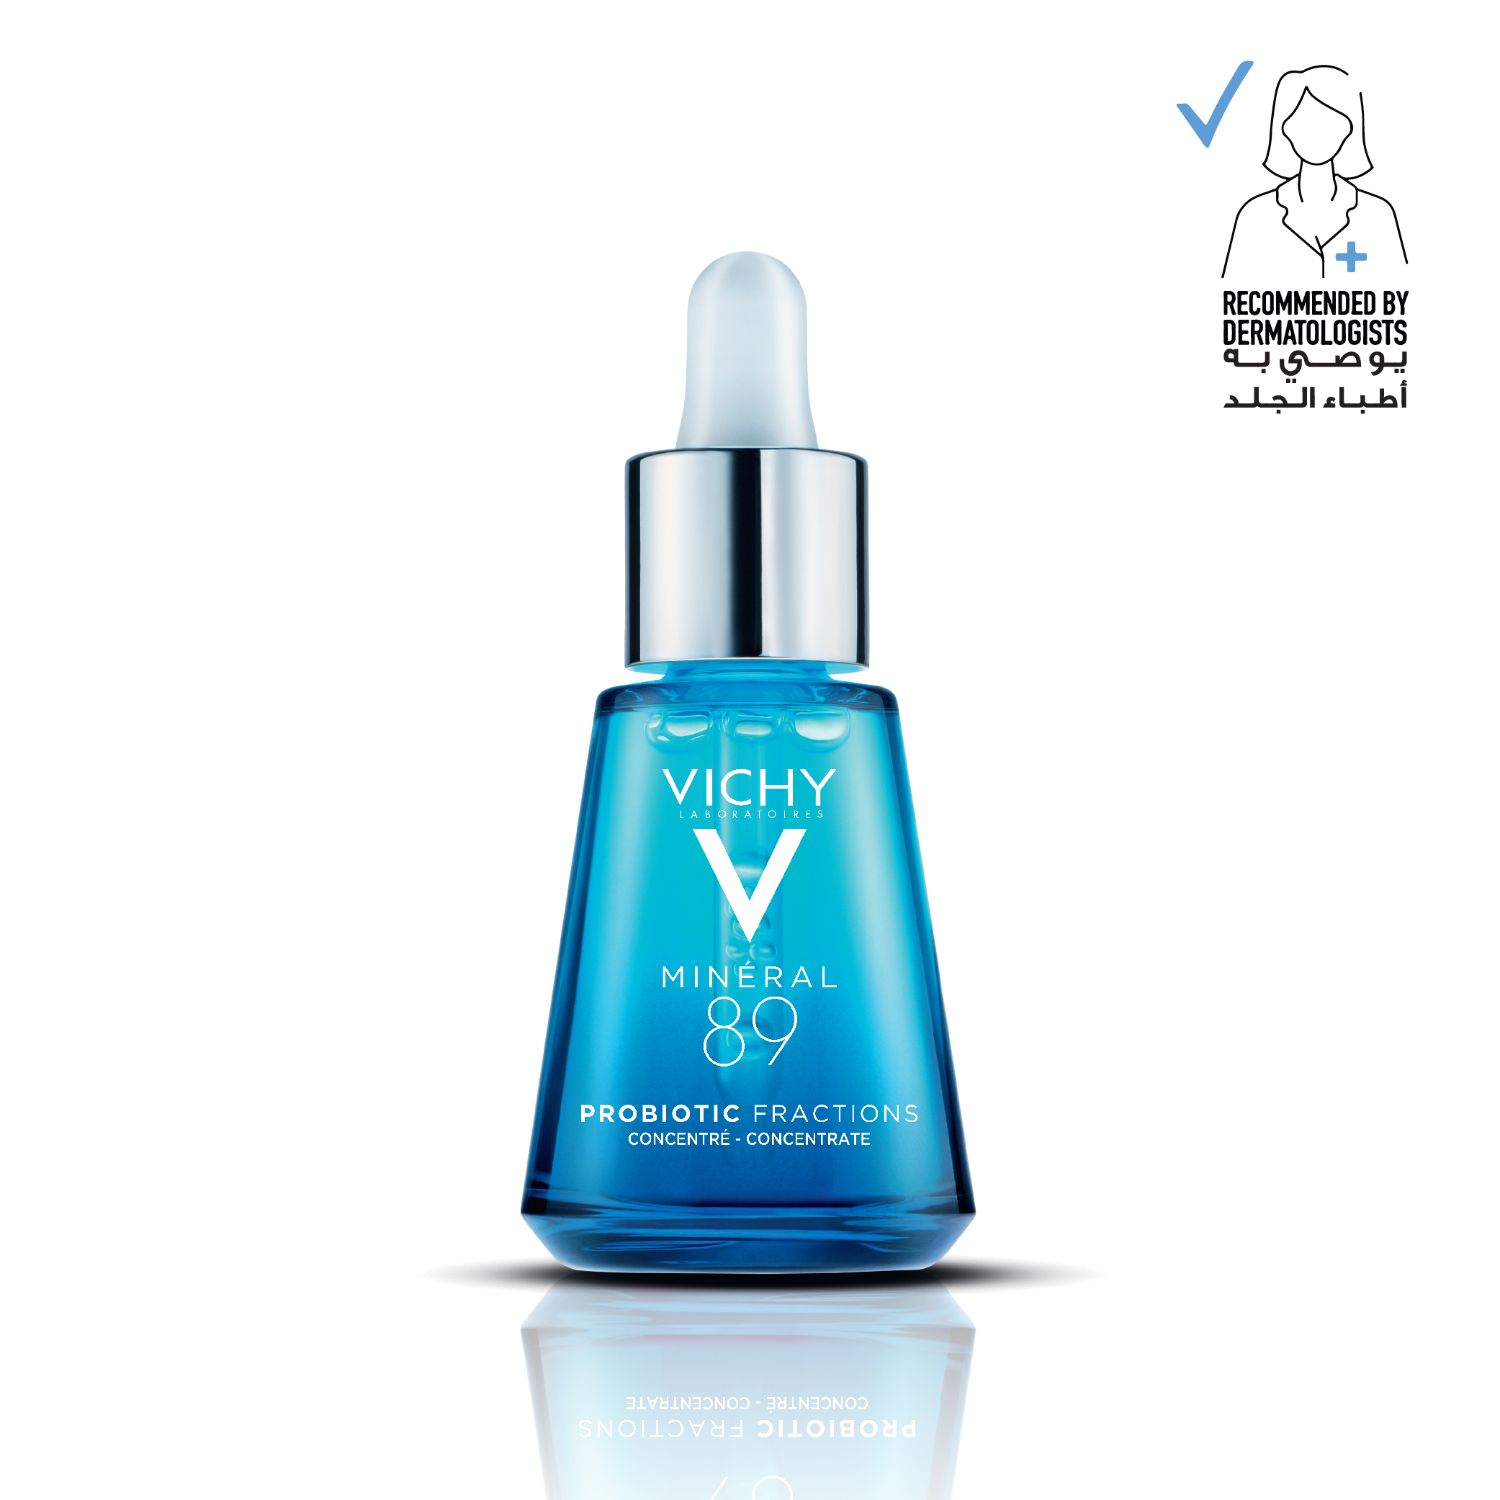 Back Image for Vichy Minéral 89 Probiotic Fractions Concentrate 30ml